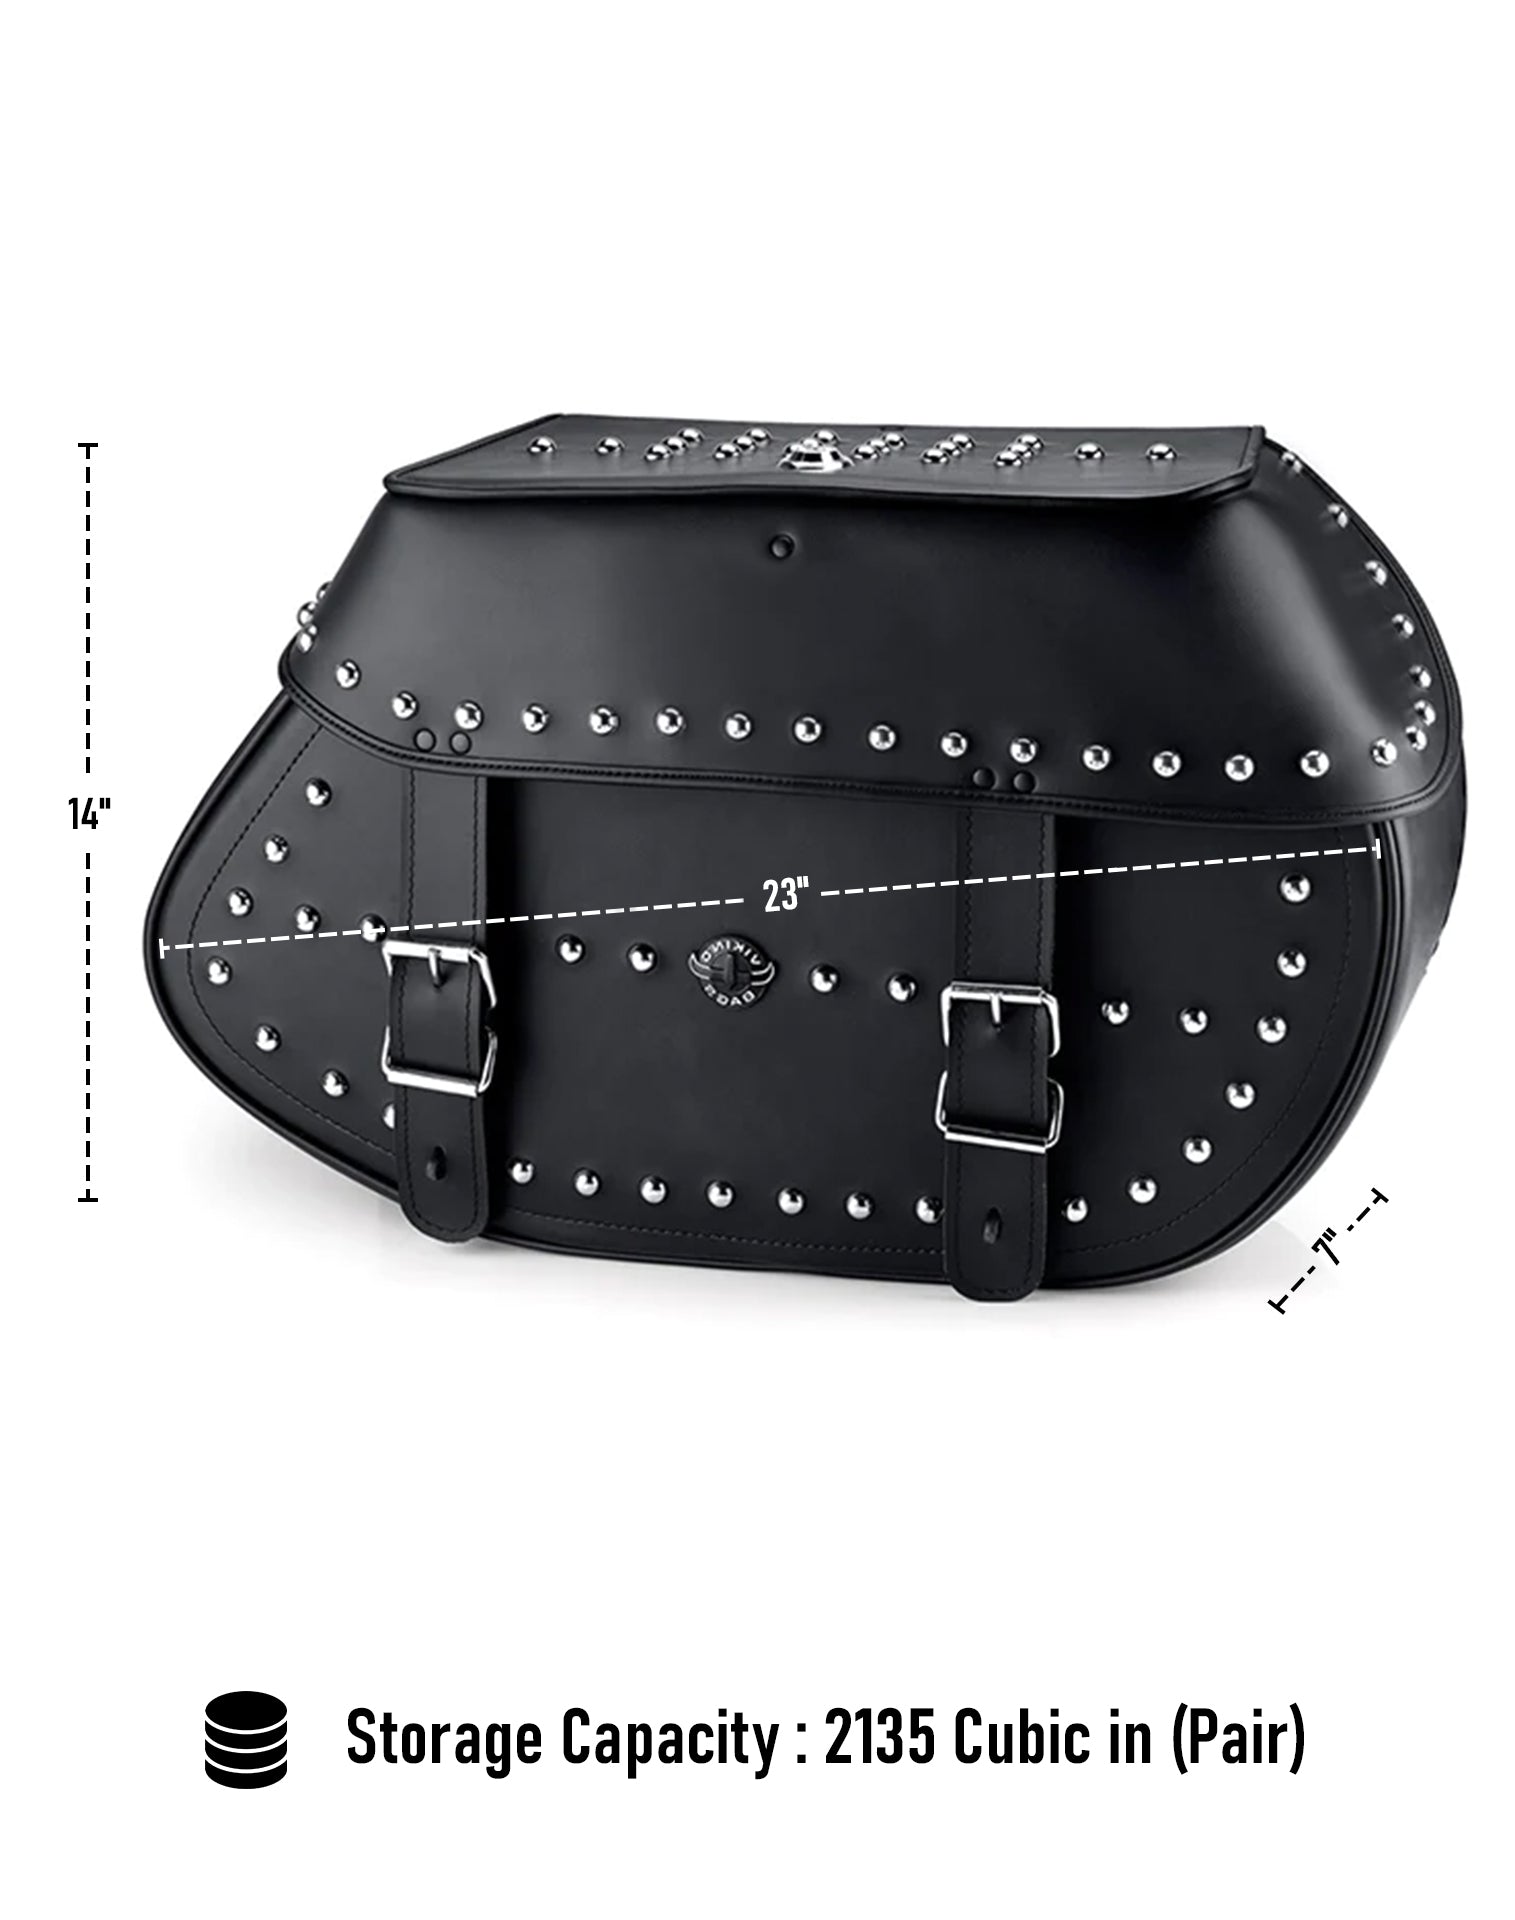 Viking Legacy Extra Large Studded Leather Motorcycle Saddlebags For Harley Softail Slim Can Store Your Ridings Gears